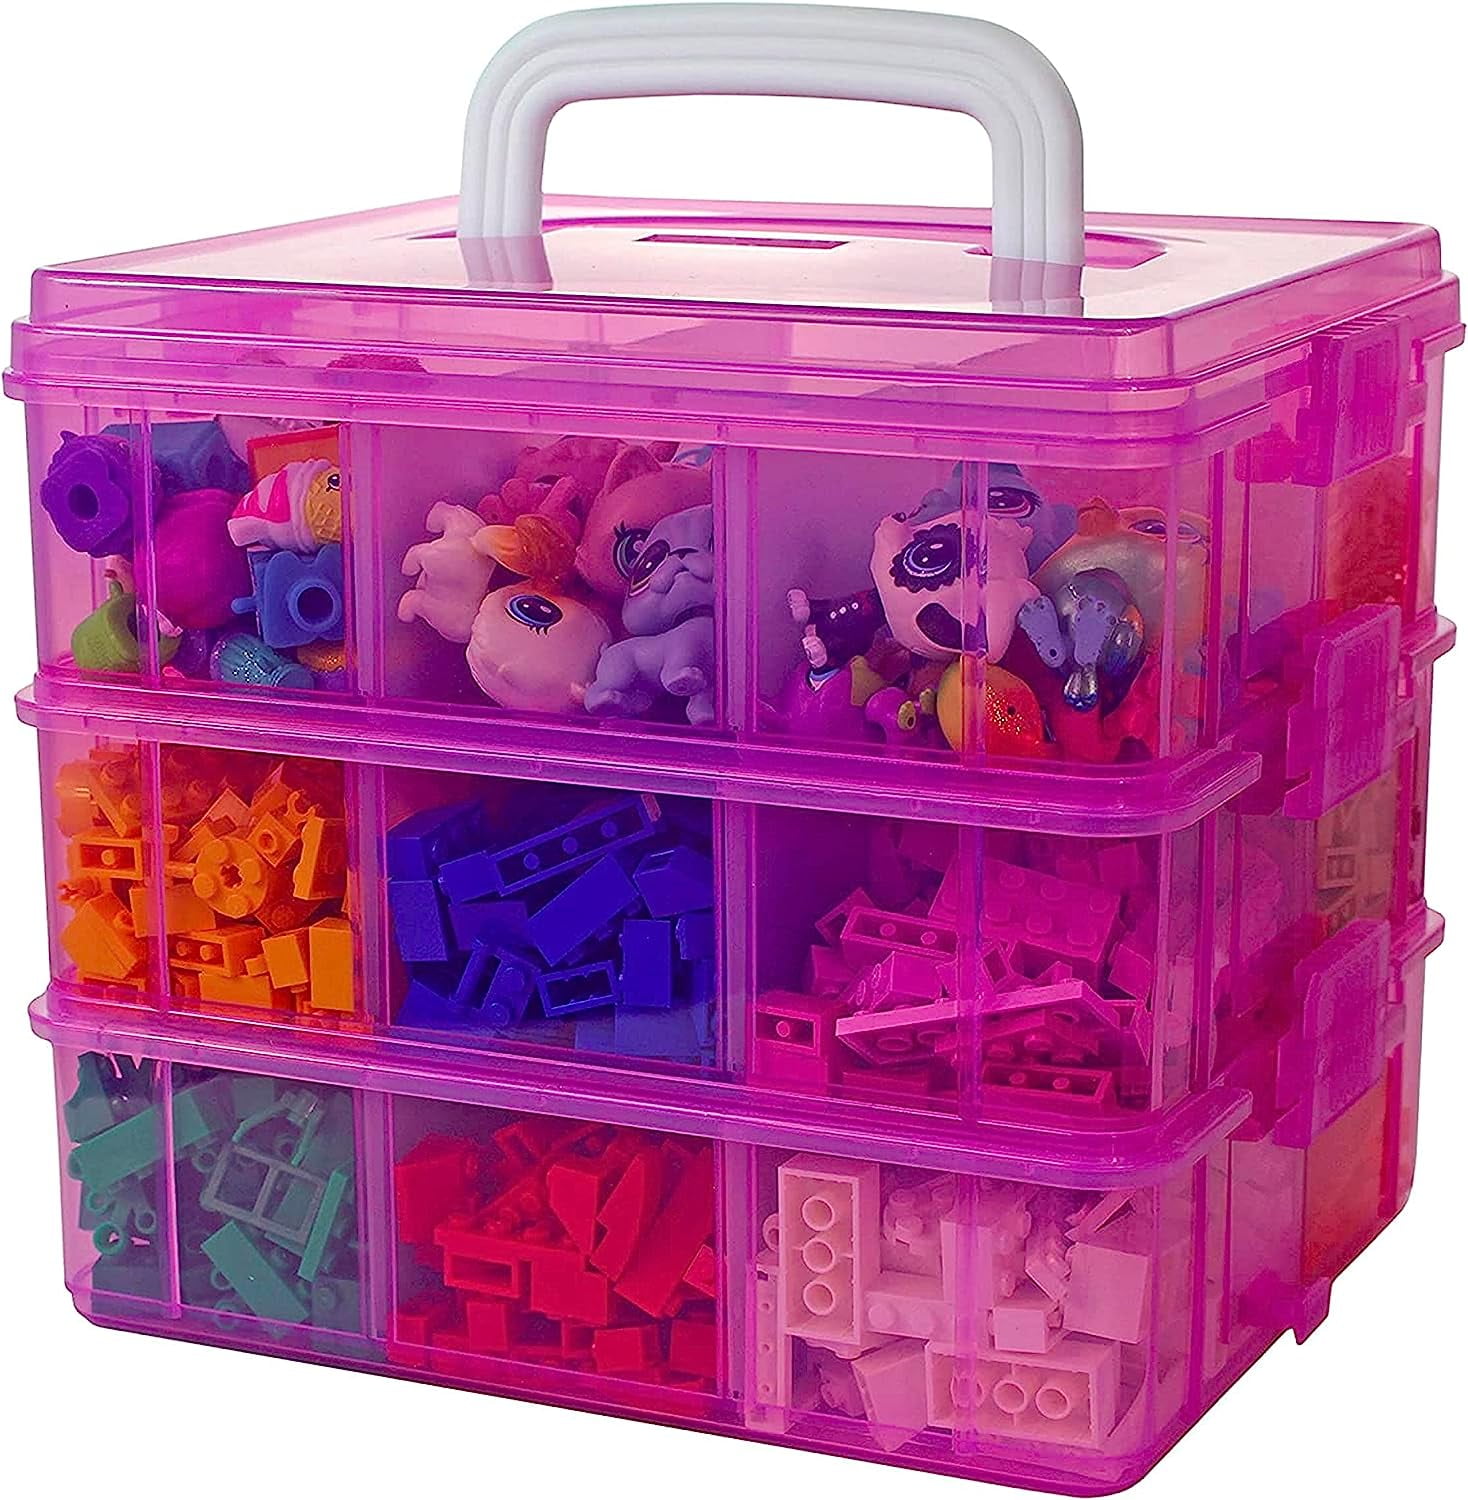 Yayun 3-Tier Pink Stackable Storage Container with Dividers, 18  Compartments Plastic Organizer Box for Dolls, Fuse Beads, Nail Polish,  Tools,Jewelry